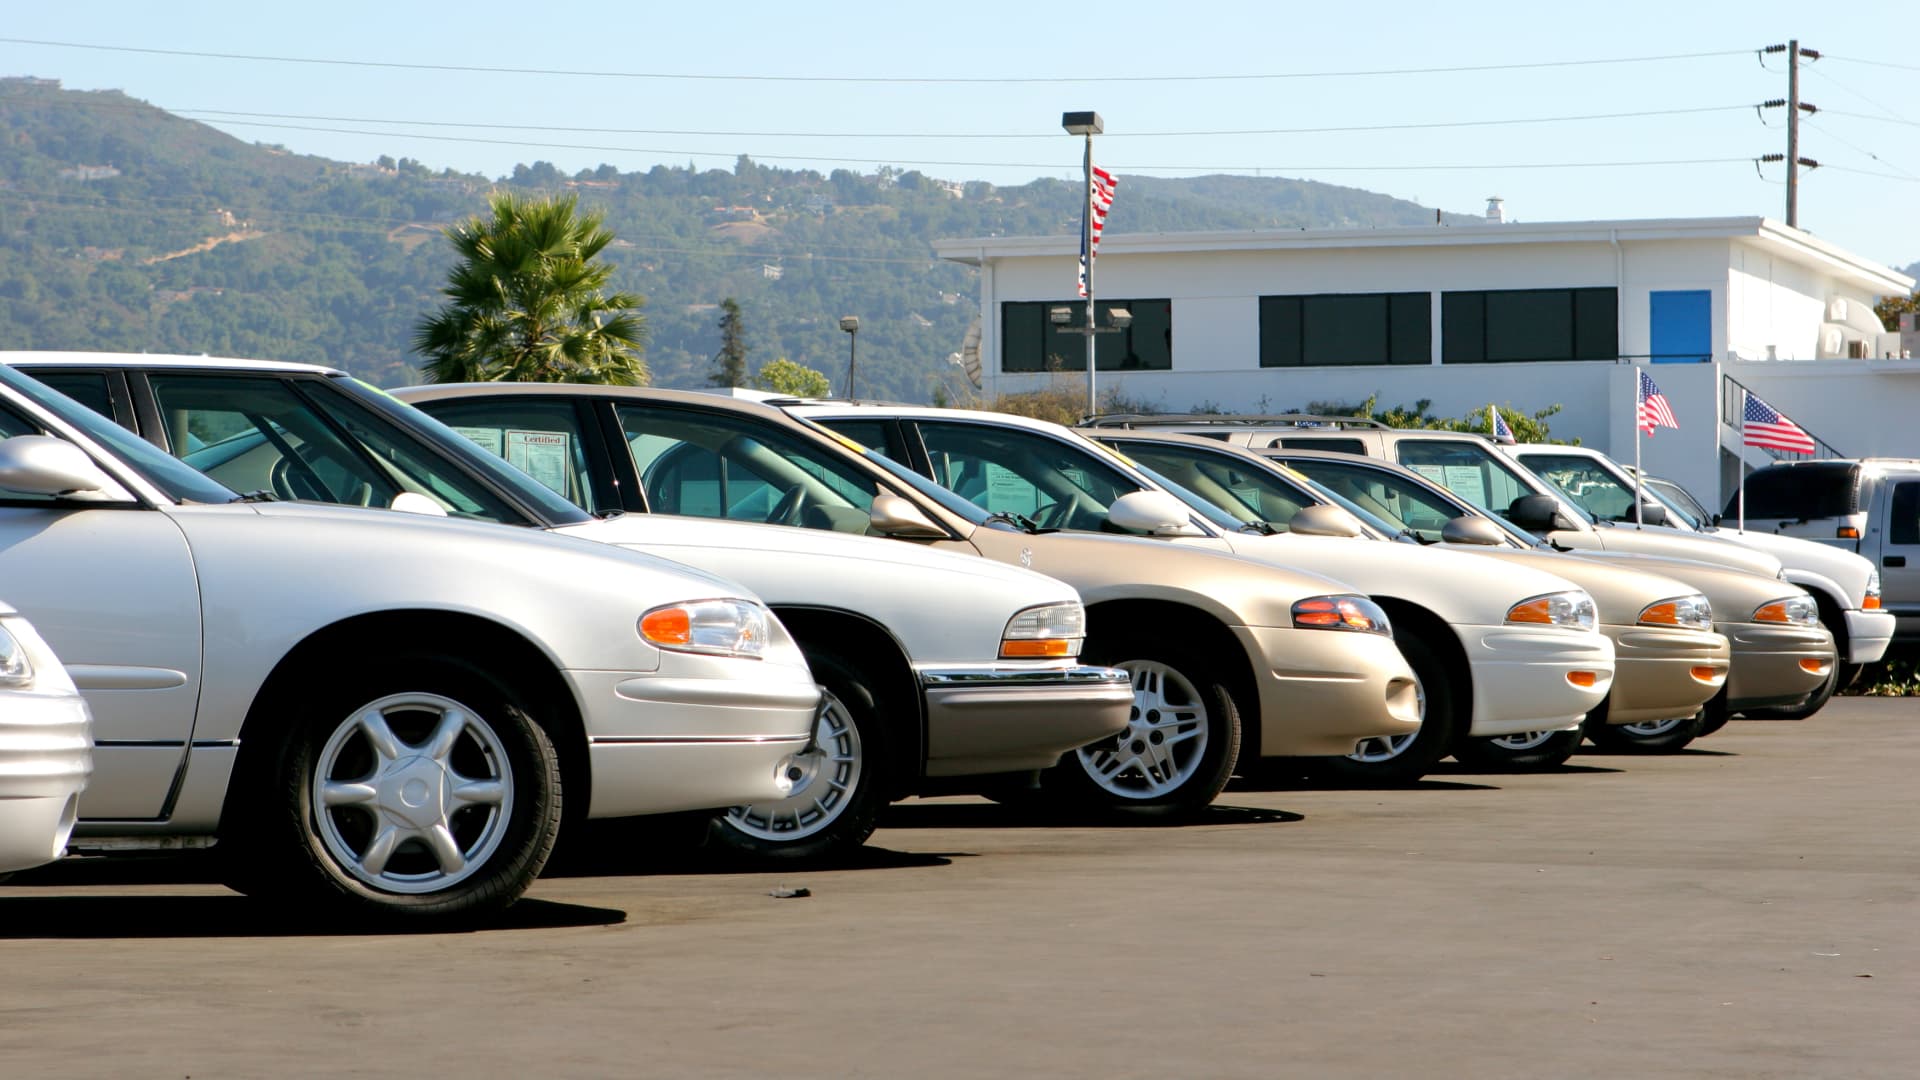 Donating a car to charity? You might want to pump the brakes